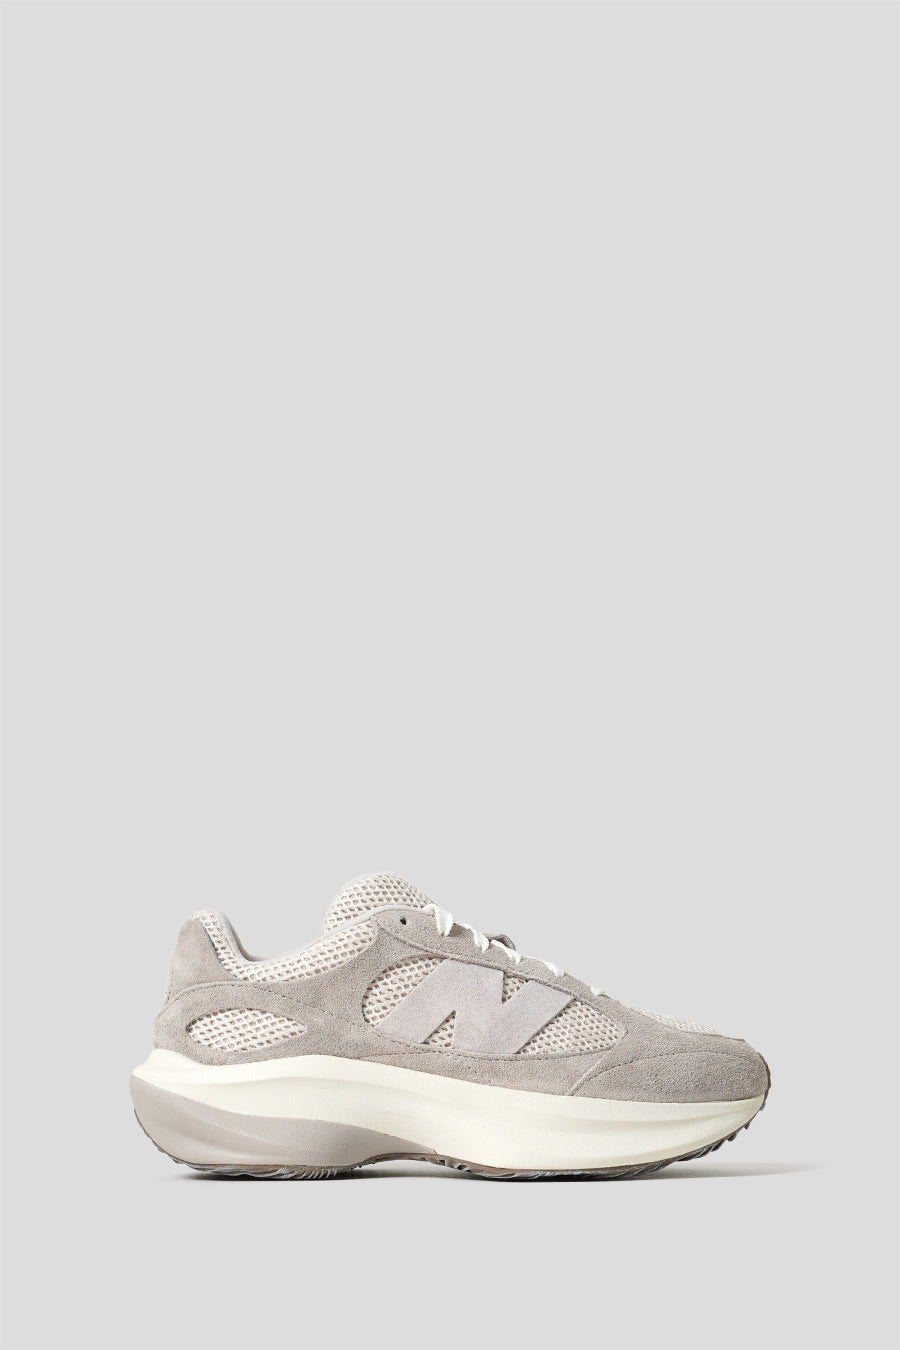 NEW BALANCE - MOONROCK MOONBEAM AND SEA SALT WRPD RUNNER GREY DAY SNEAKERS - LE LABO STORE